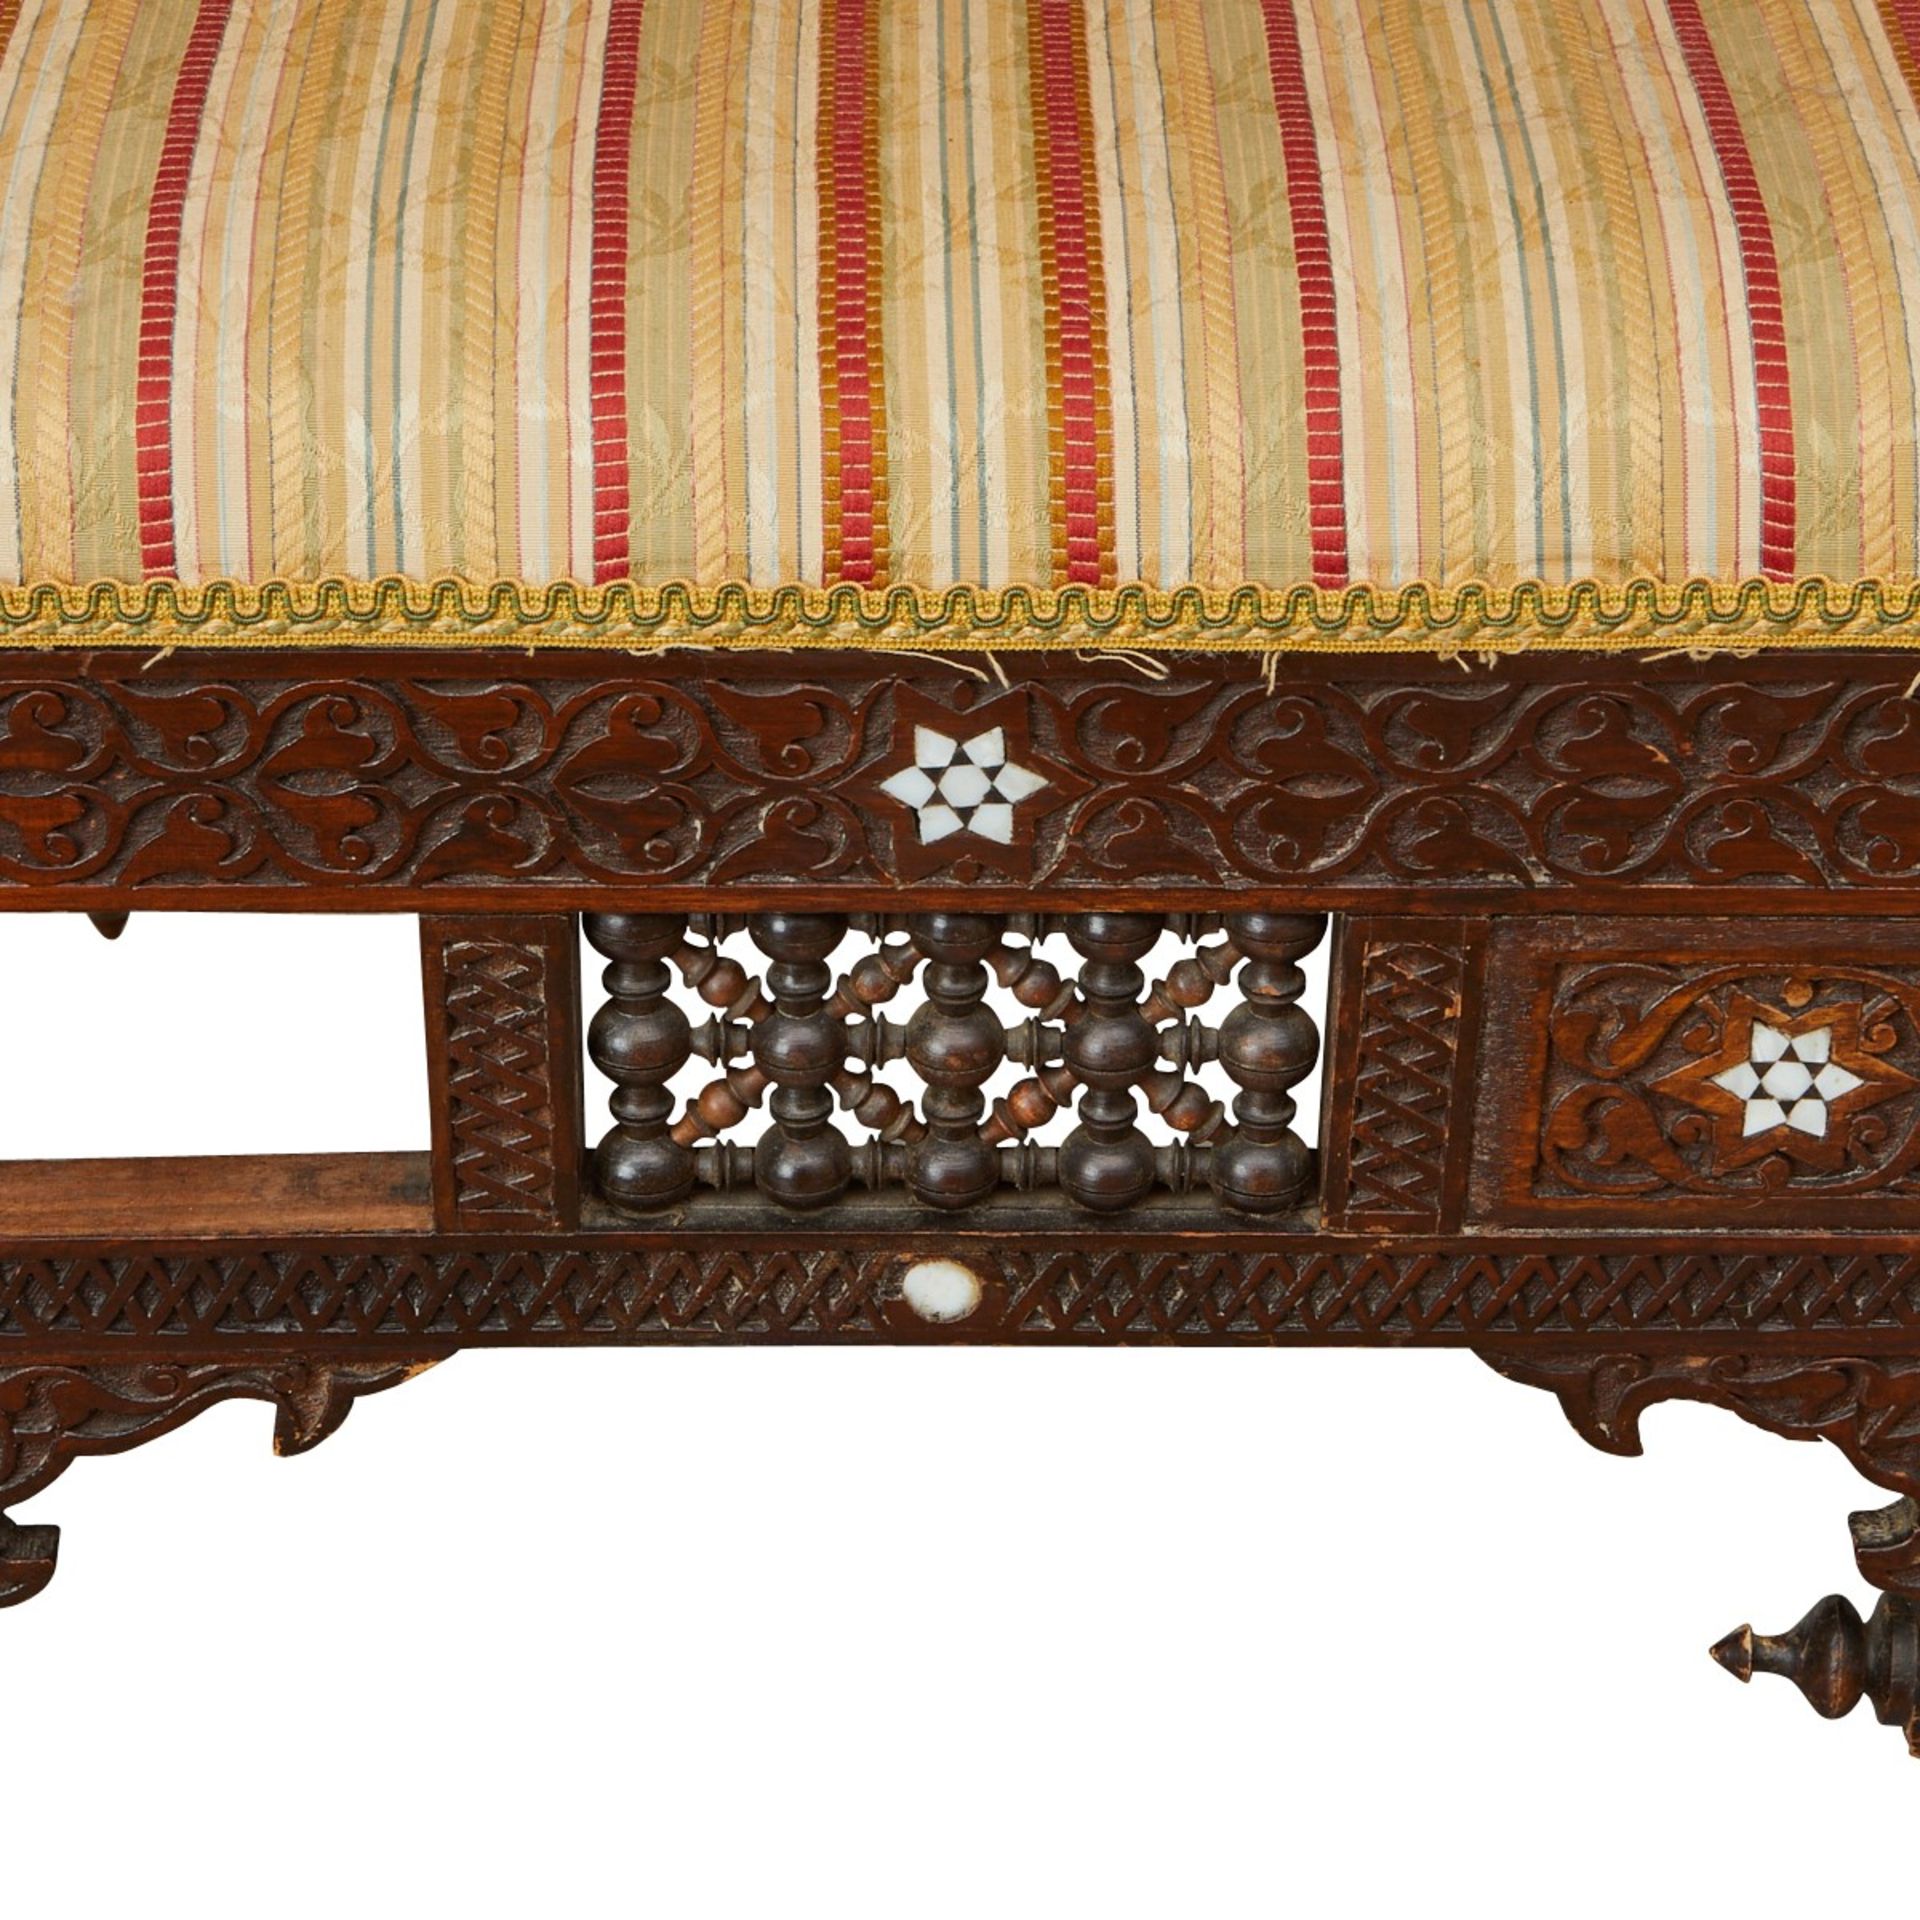 Syrian Mother of Pearl Inlaid Armchair - Image 7 of 8